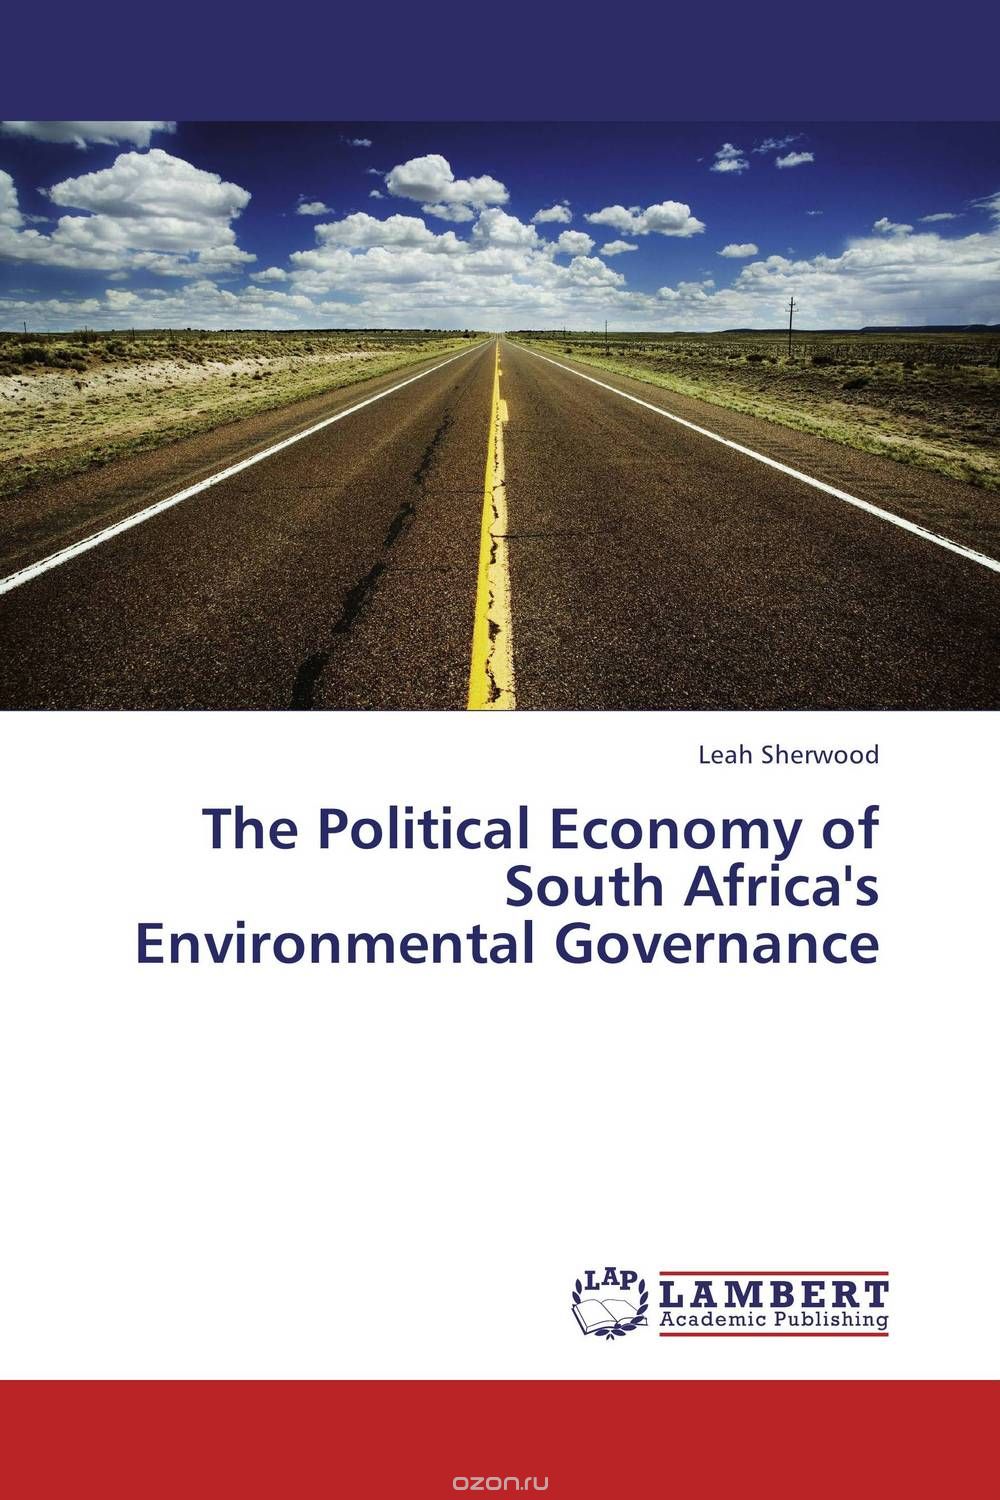 The Political Economy of South Africa's Environmental Governance